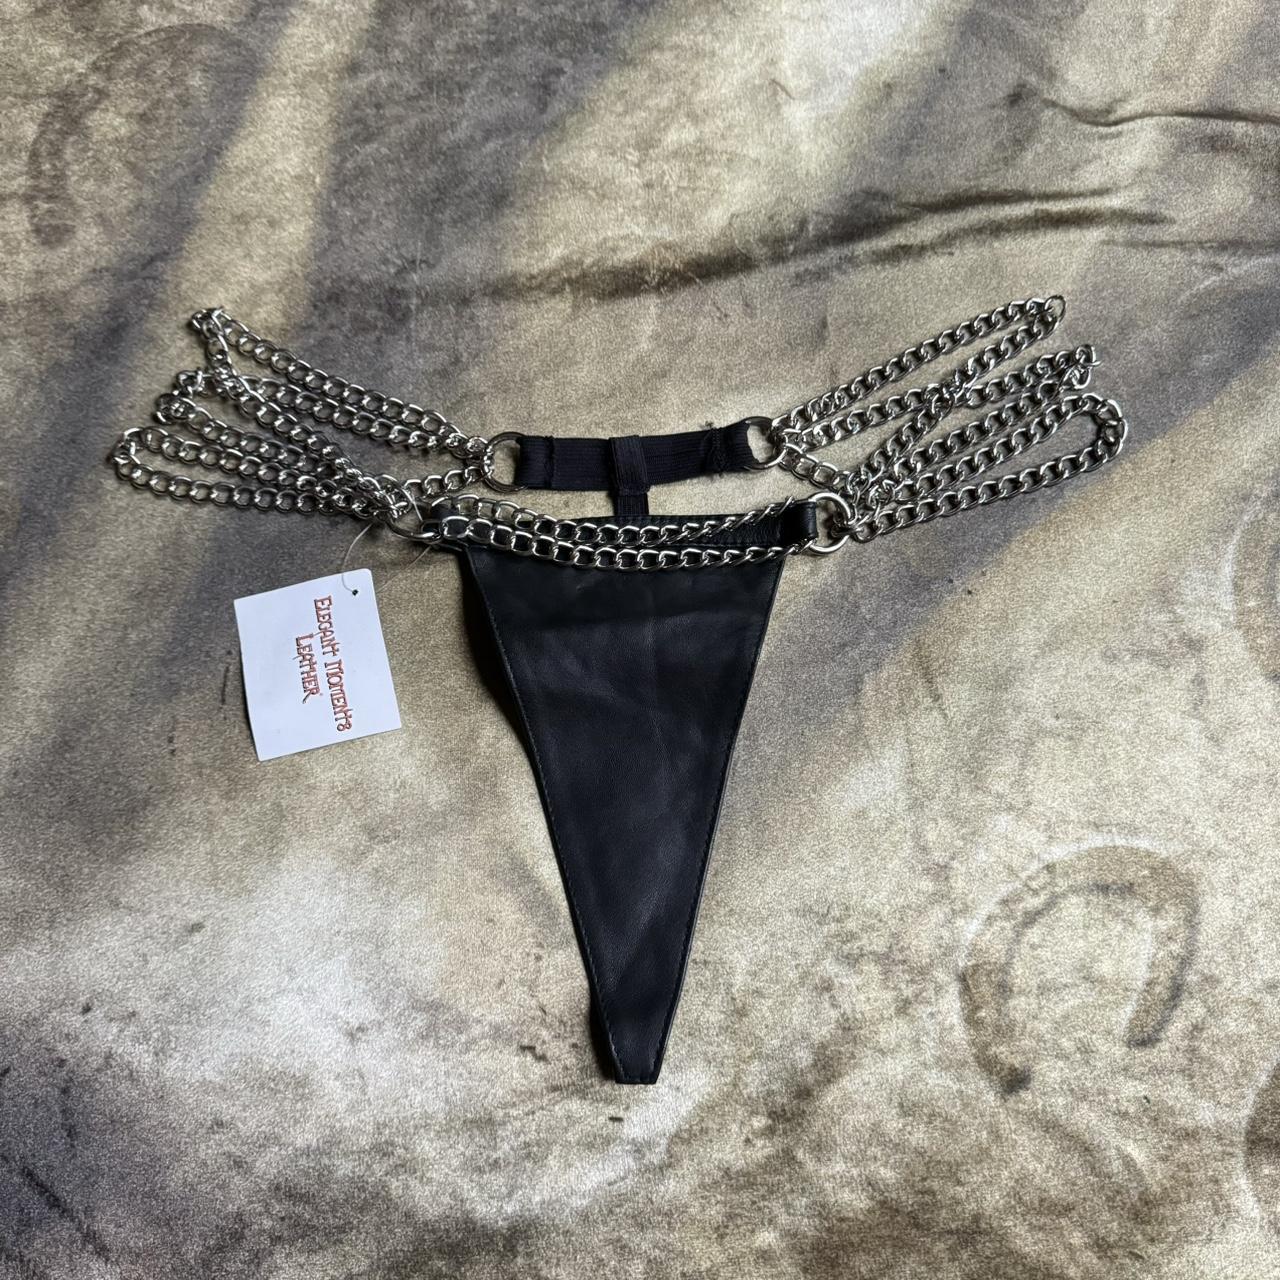 completely new strawberry mesh underwear with bows - Depop